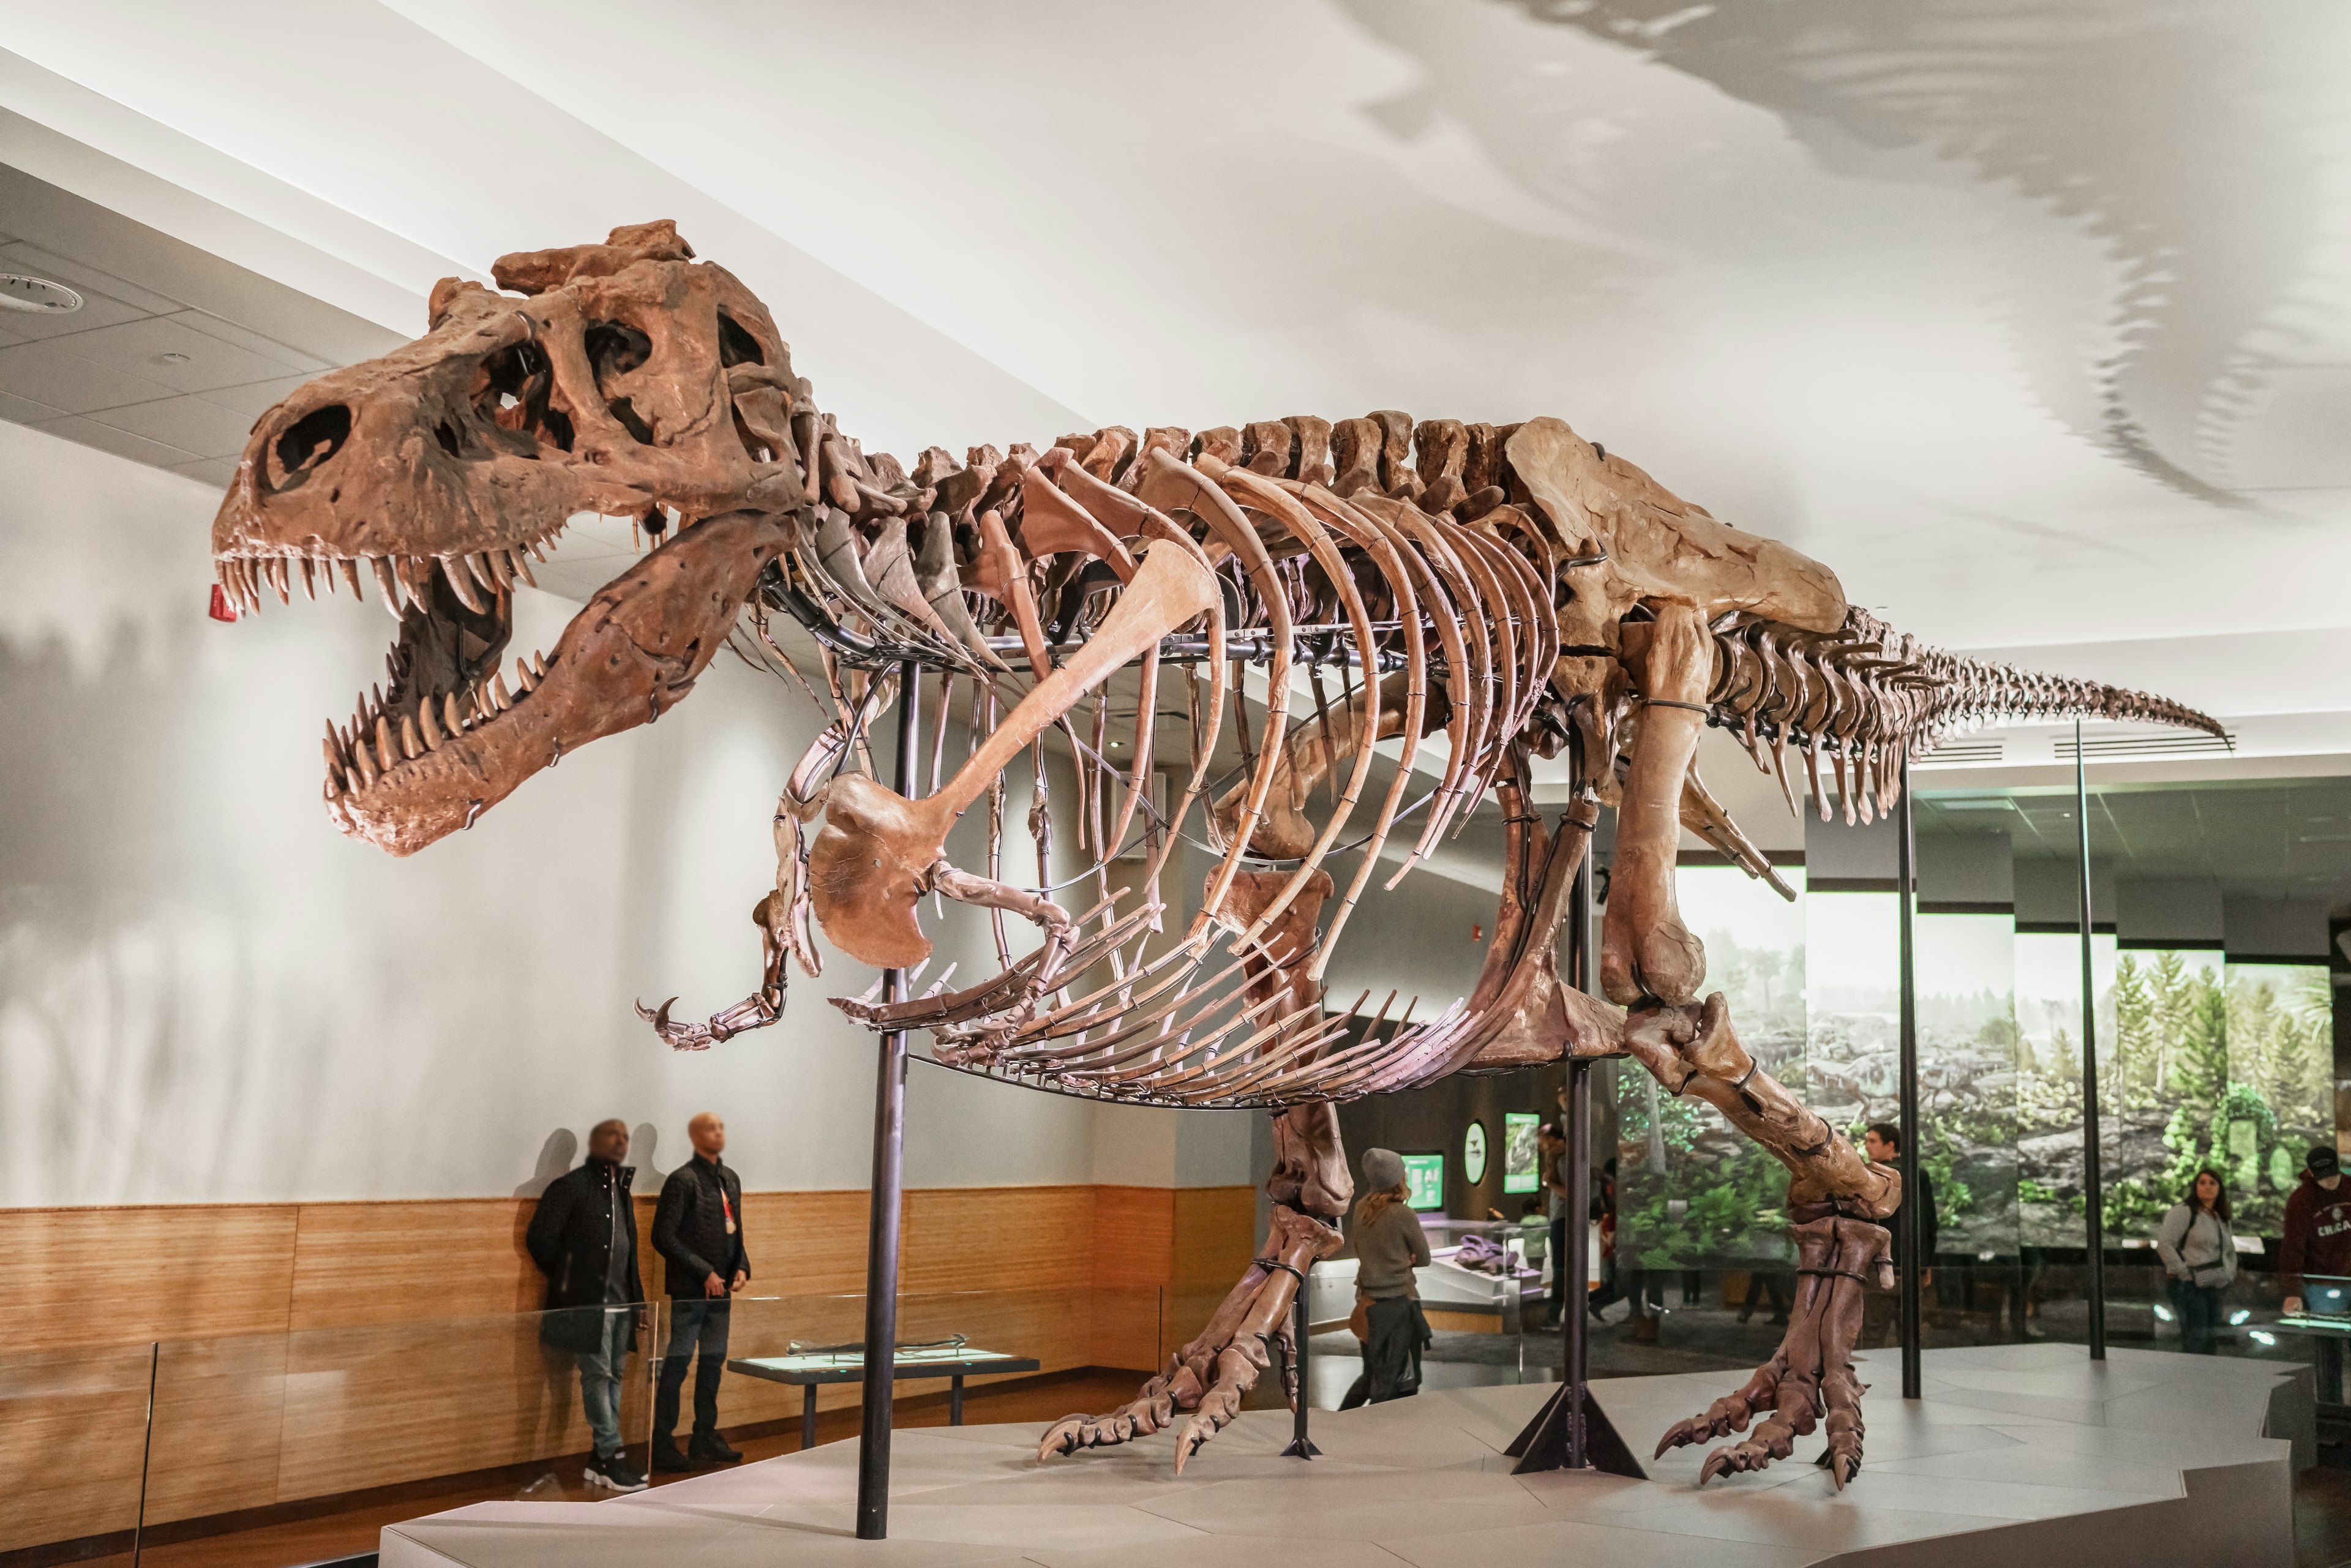 Sue, a reconstructed T. rex skeleton, at the Field Museum in Chicago